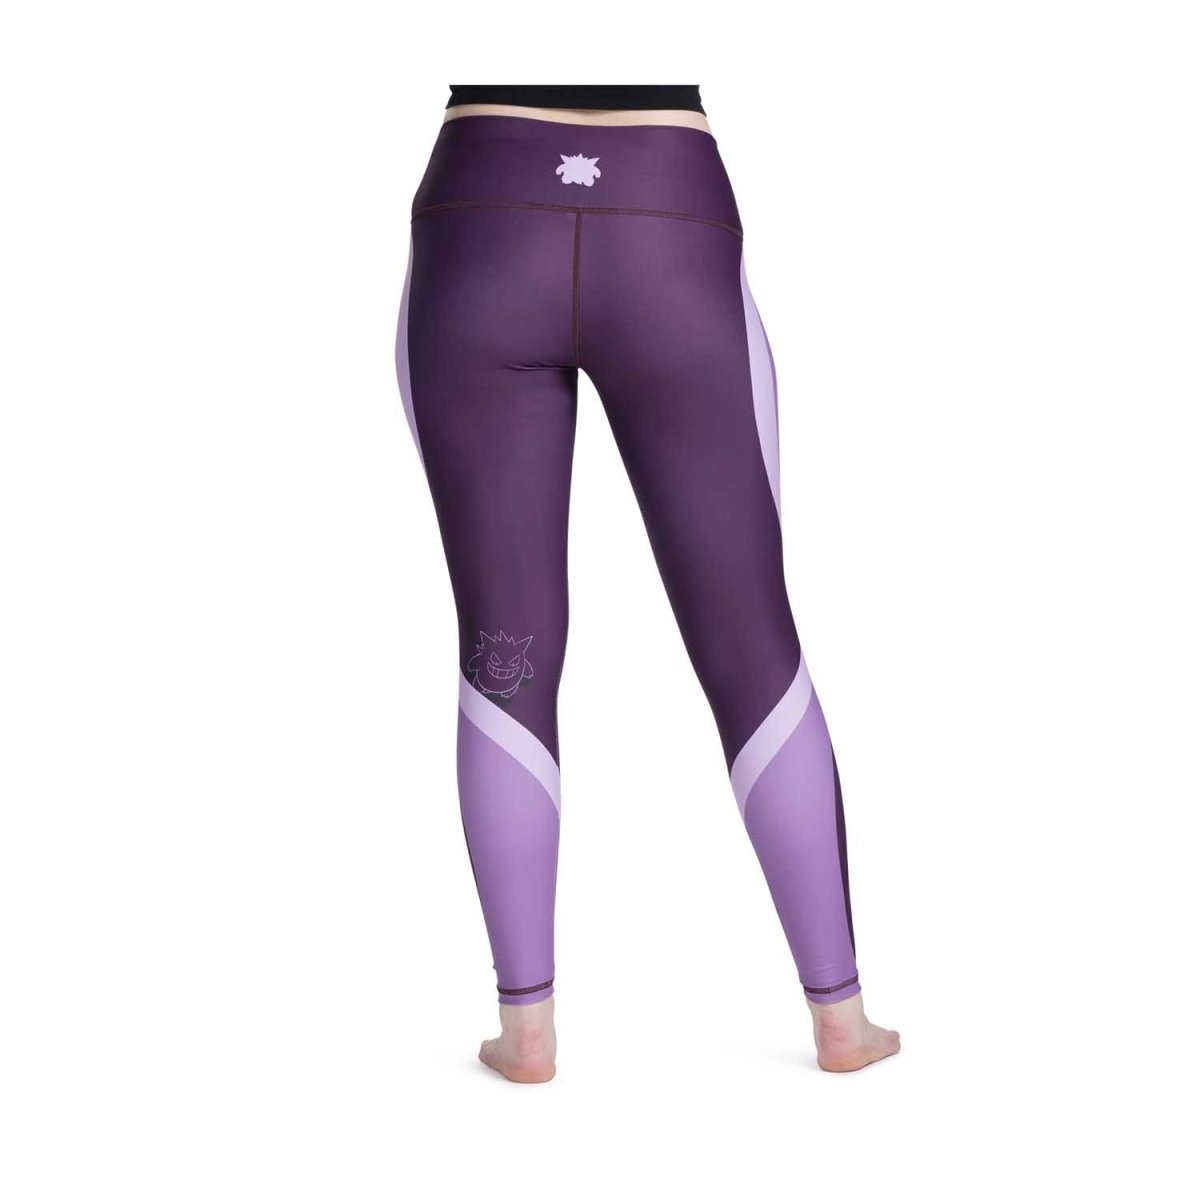 Set Active Luxform Leggings Purple Size XL - $75 New With Tags - From Jens